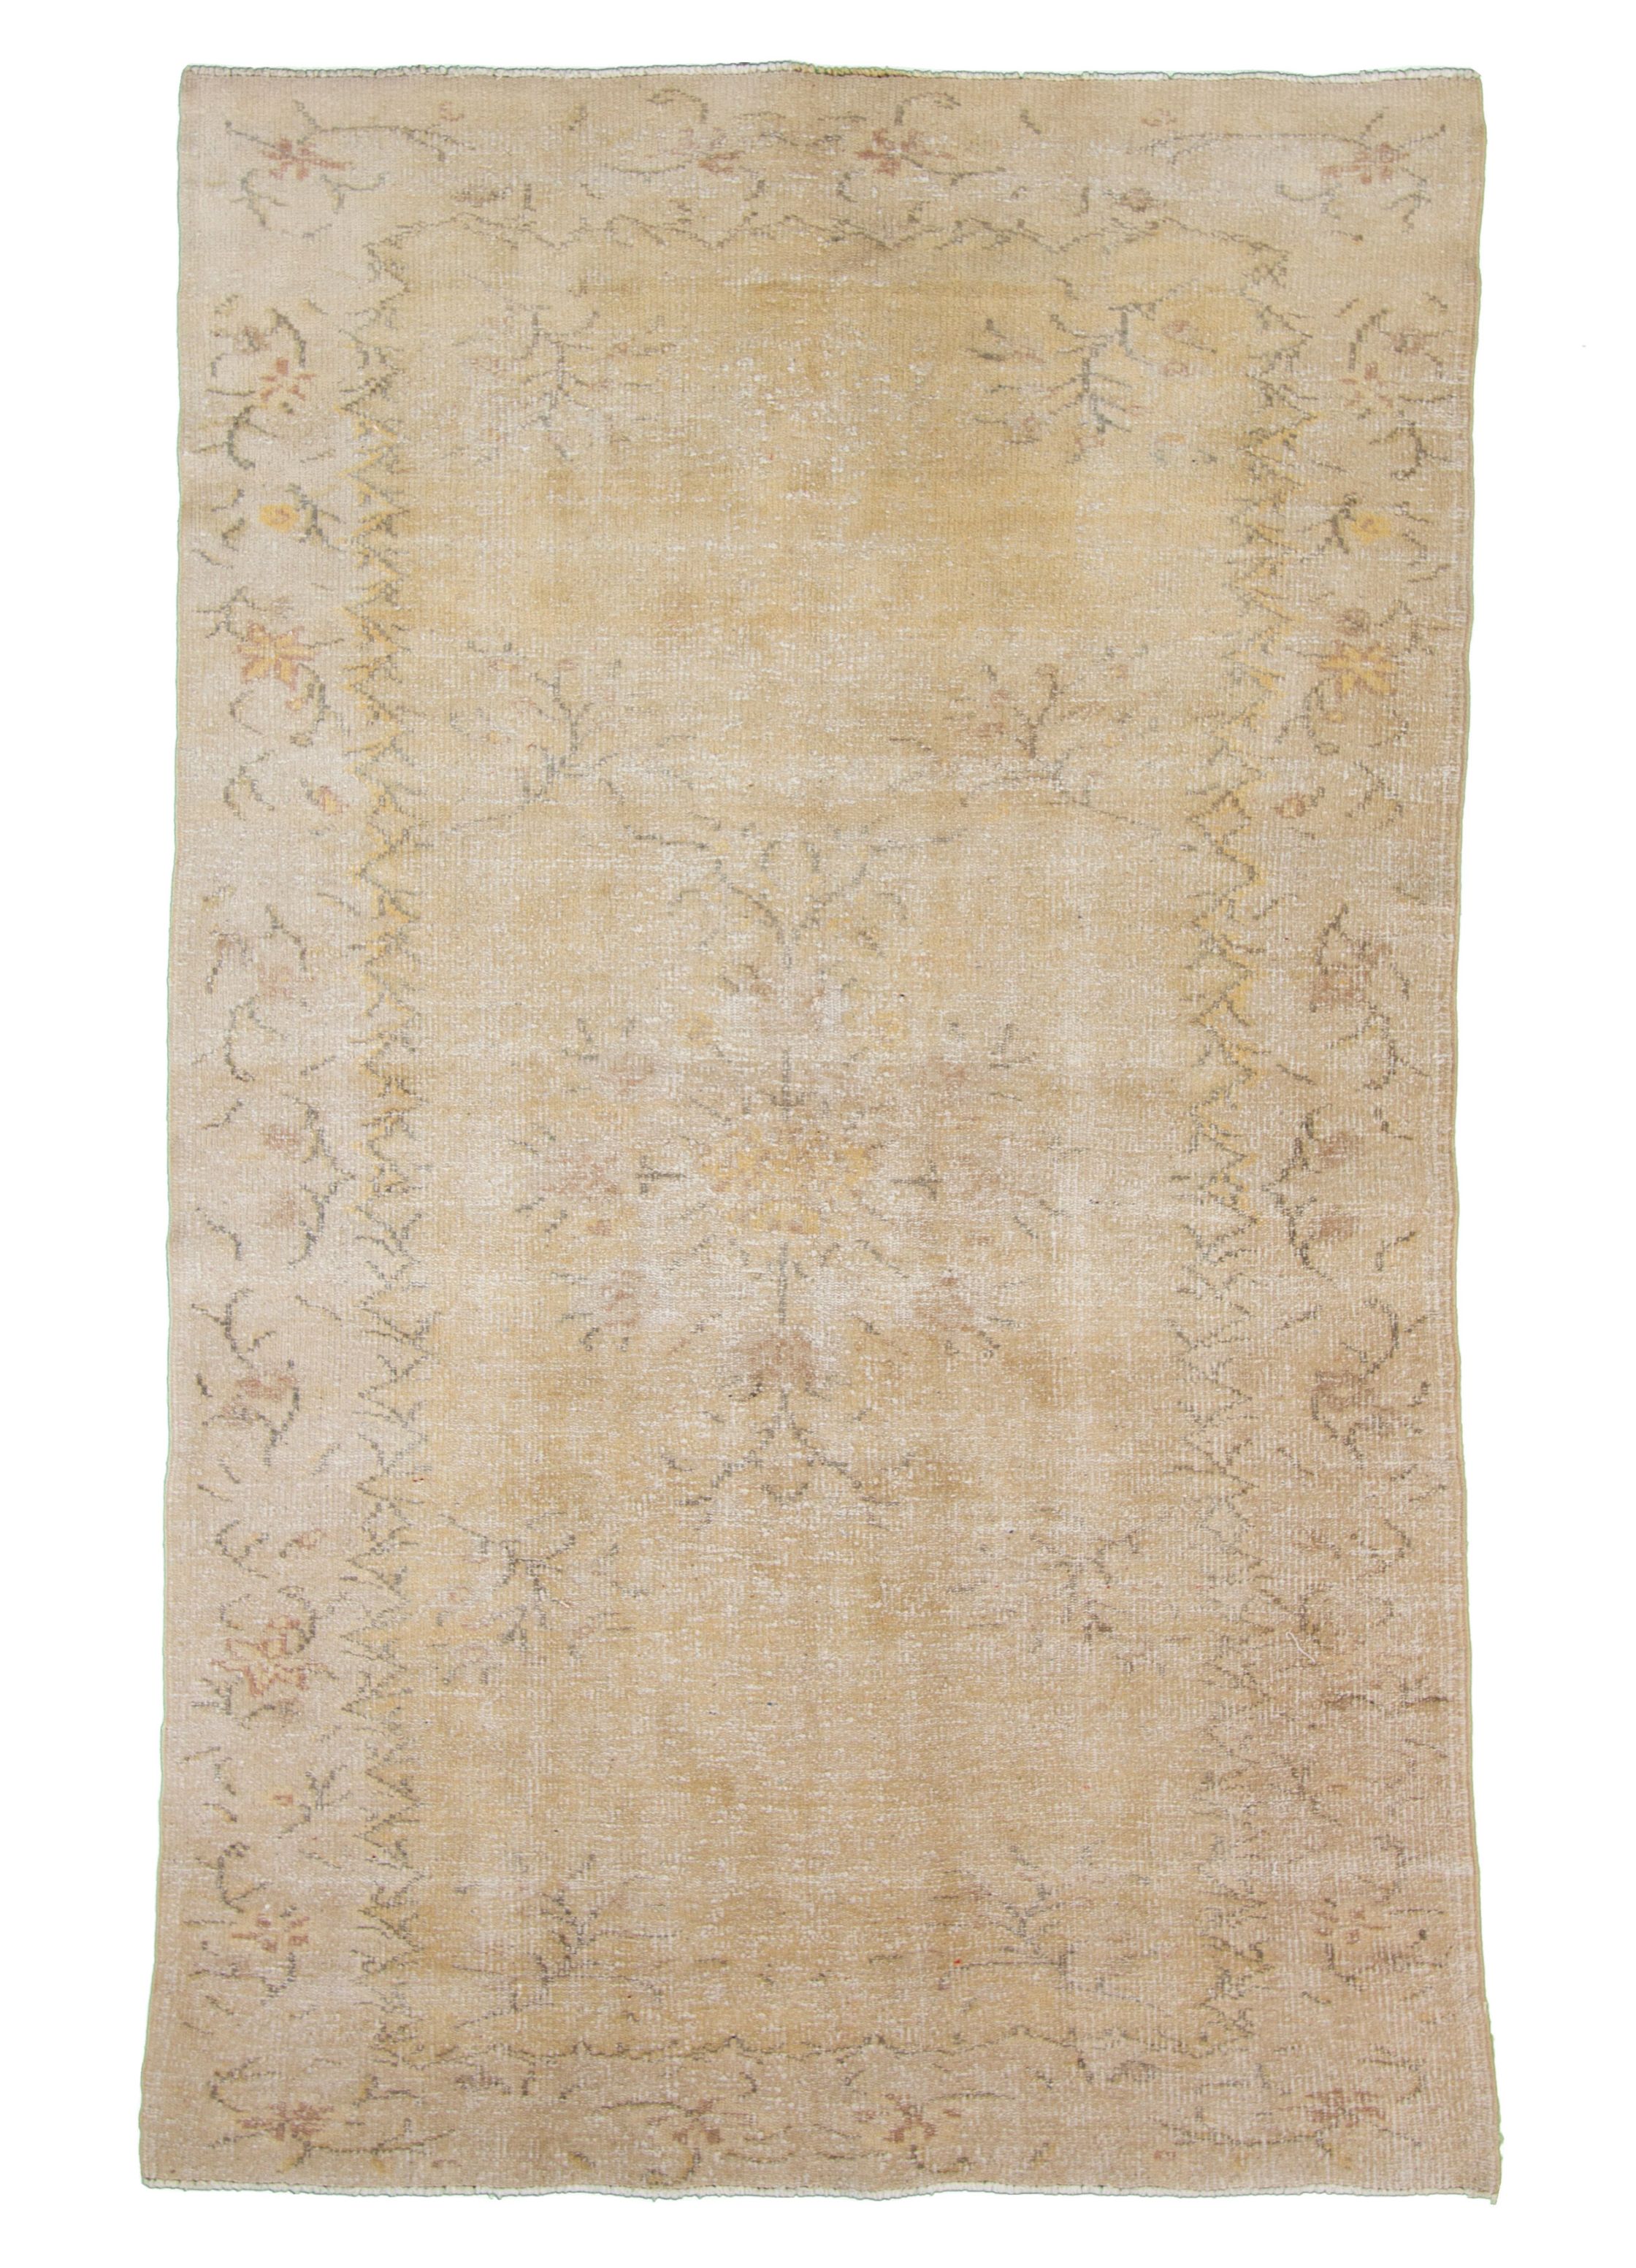 Hand-knotted Antalya Vintage   Rug 5'6" x 8'11" Size: 5'6" x 8'11"  